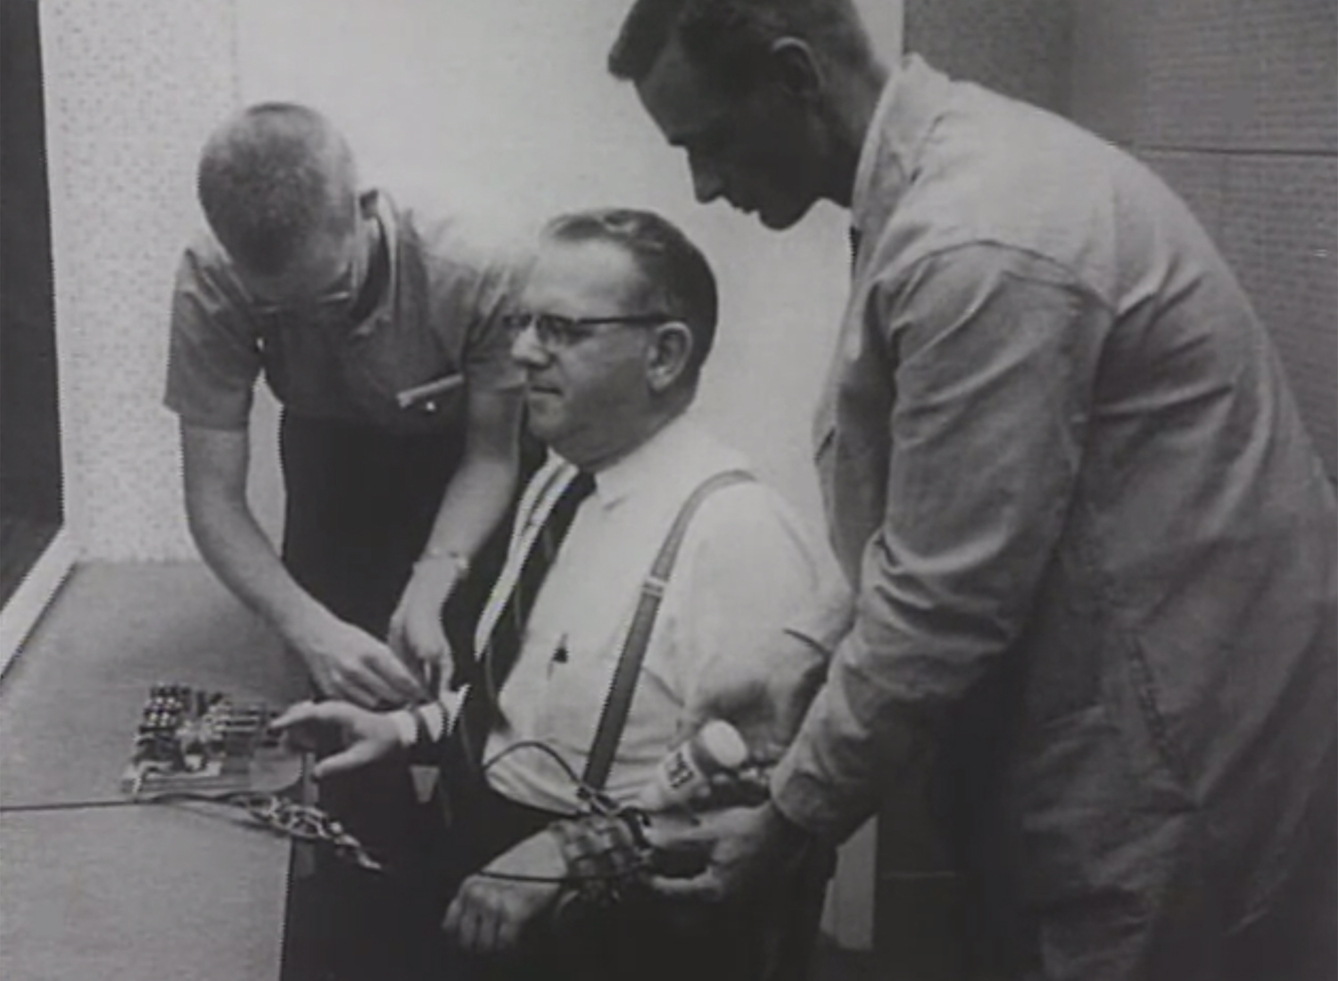 Two men attach wires to a subject in an experiment.